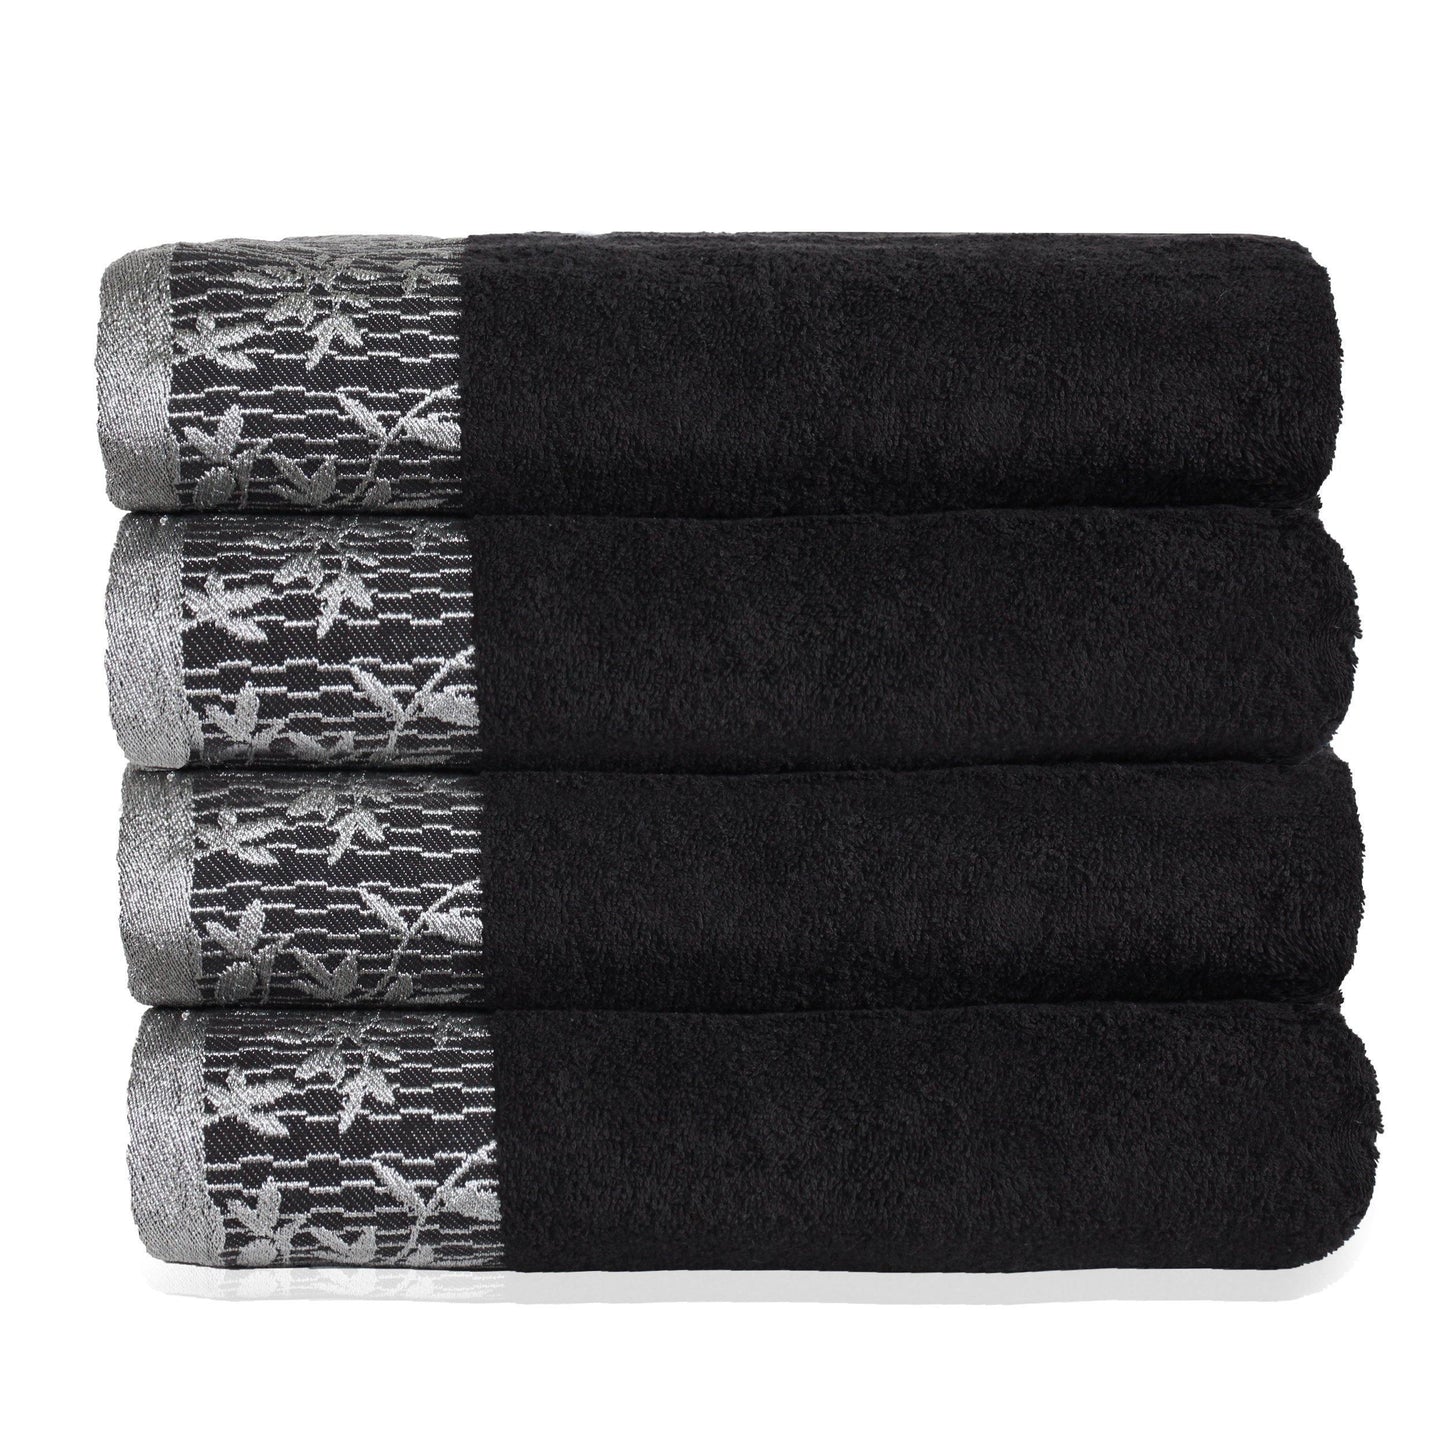 Cotton Absorbent 4-Piece Bath Towel Set 30" x 54" by Superior FredCo